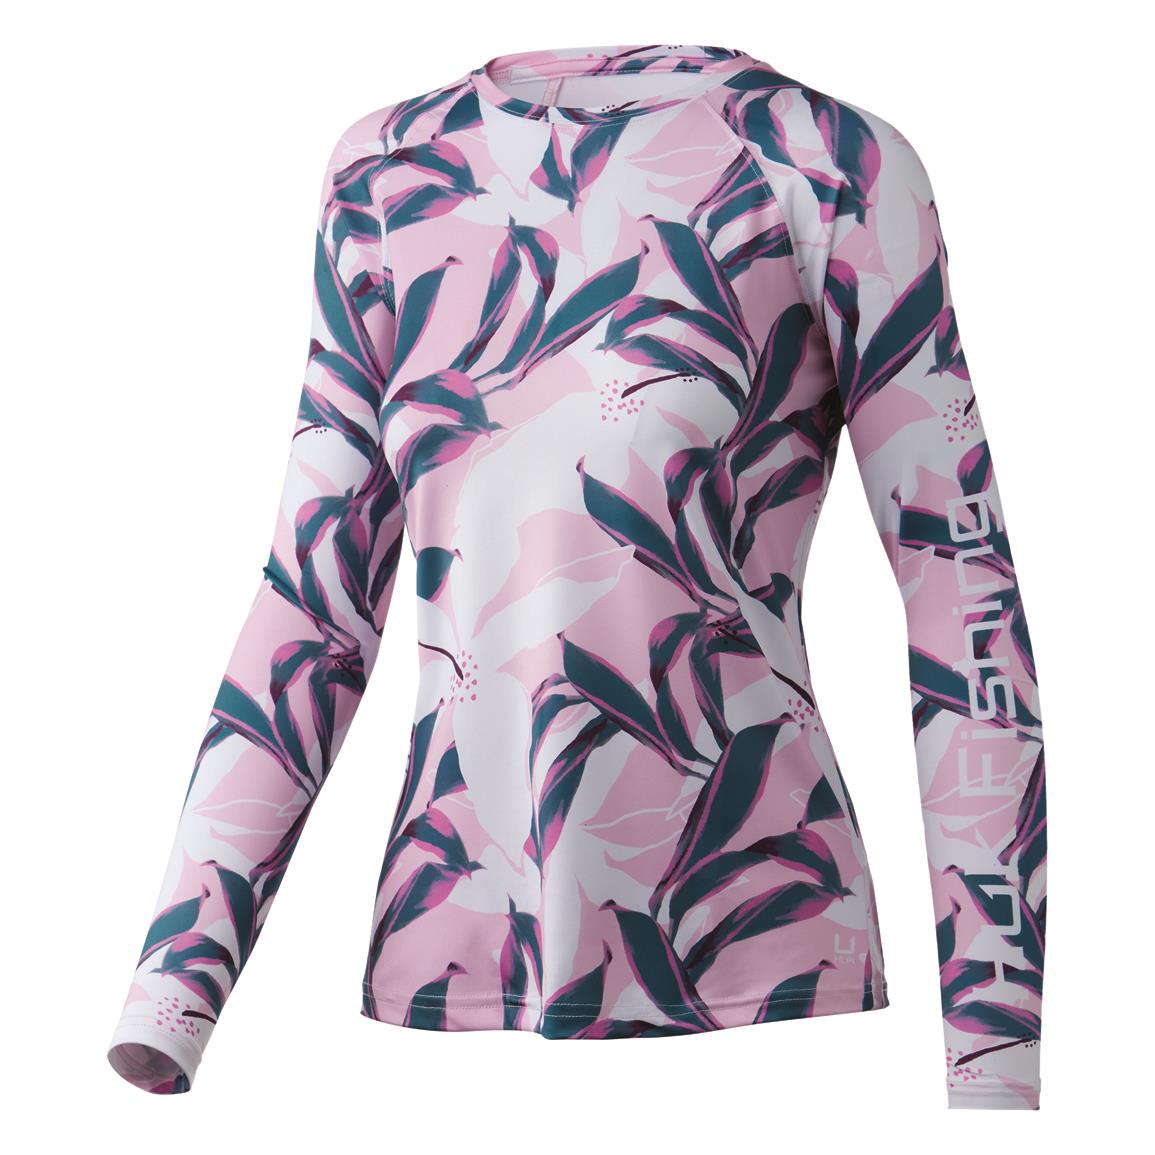 Huk Women's Tall Leaves Pursuit Shirt, Barely Pink